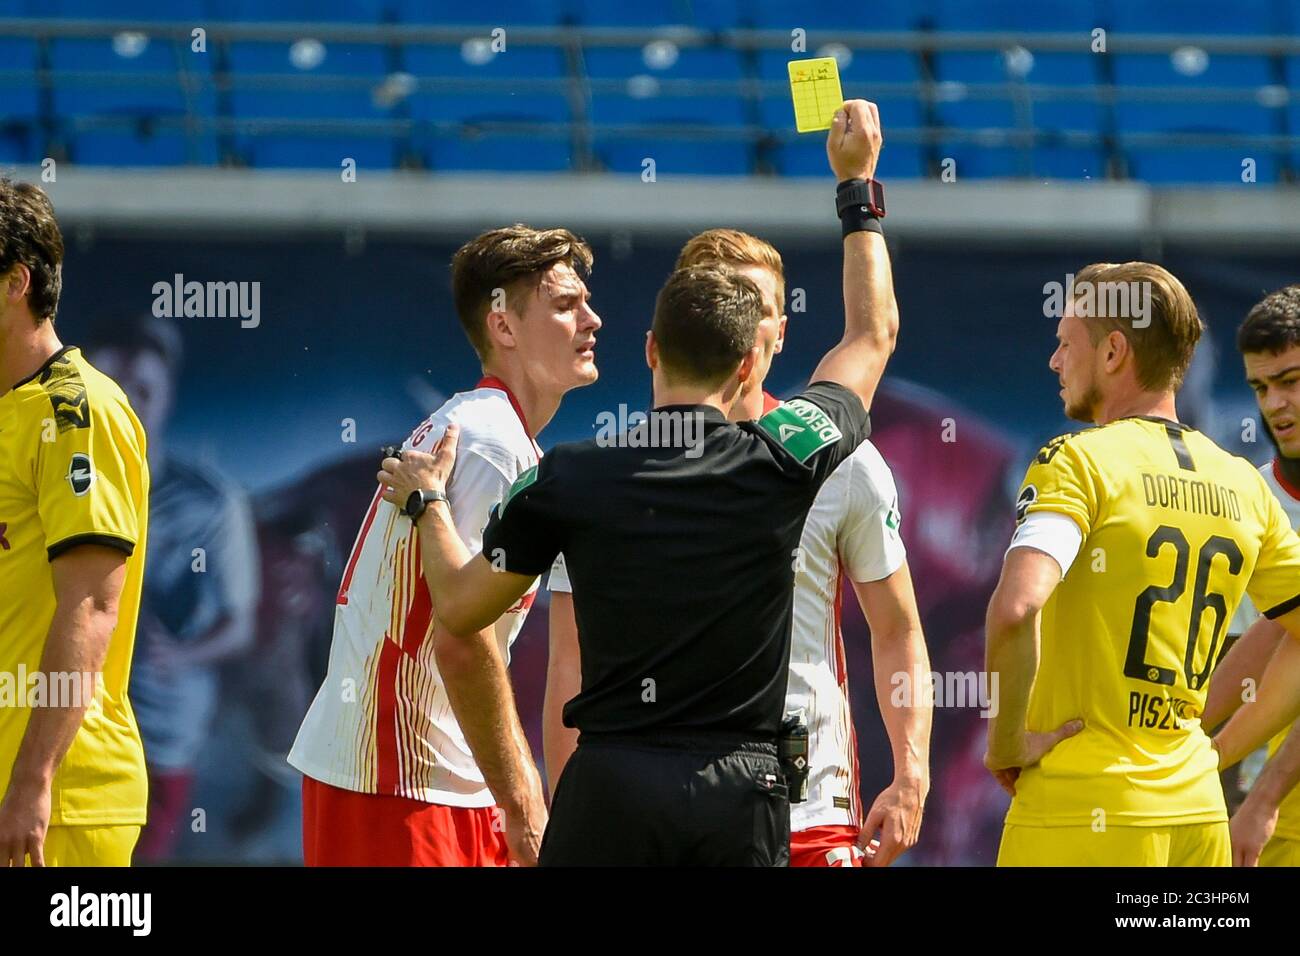 Leipzig, Germany. 20th June, 2020. Football: Bundesliga, 33rd matchday, RB Leipzig - Borussia Dortmund, in the Red Bull Arena. Patrik Schick (2nd from left) from Leipzig gets a yellow card. Credit: Jens Meyer/AP-Pool/dpa - IMPORTANT NOTE: In accordance with the regulations of the DFL Deutsche Fußball Liga and the DFB Deutscher Fußball-Bund, it is prohibited to exploit or have exploited in the stadium and/or from the game taken photographs in the form of sequence images and/or video-like photo series./dpa/Alamy Live News Stock Photo